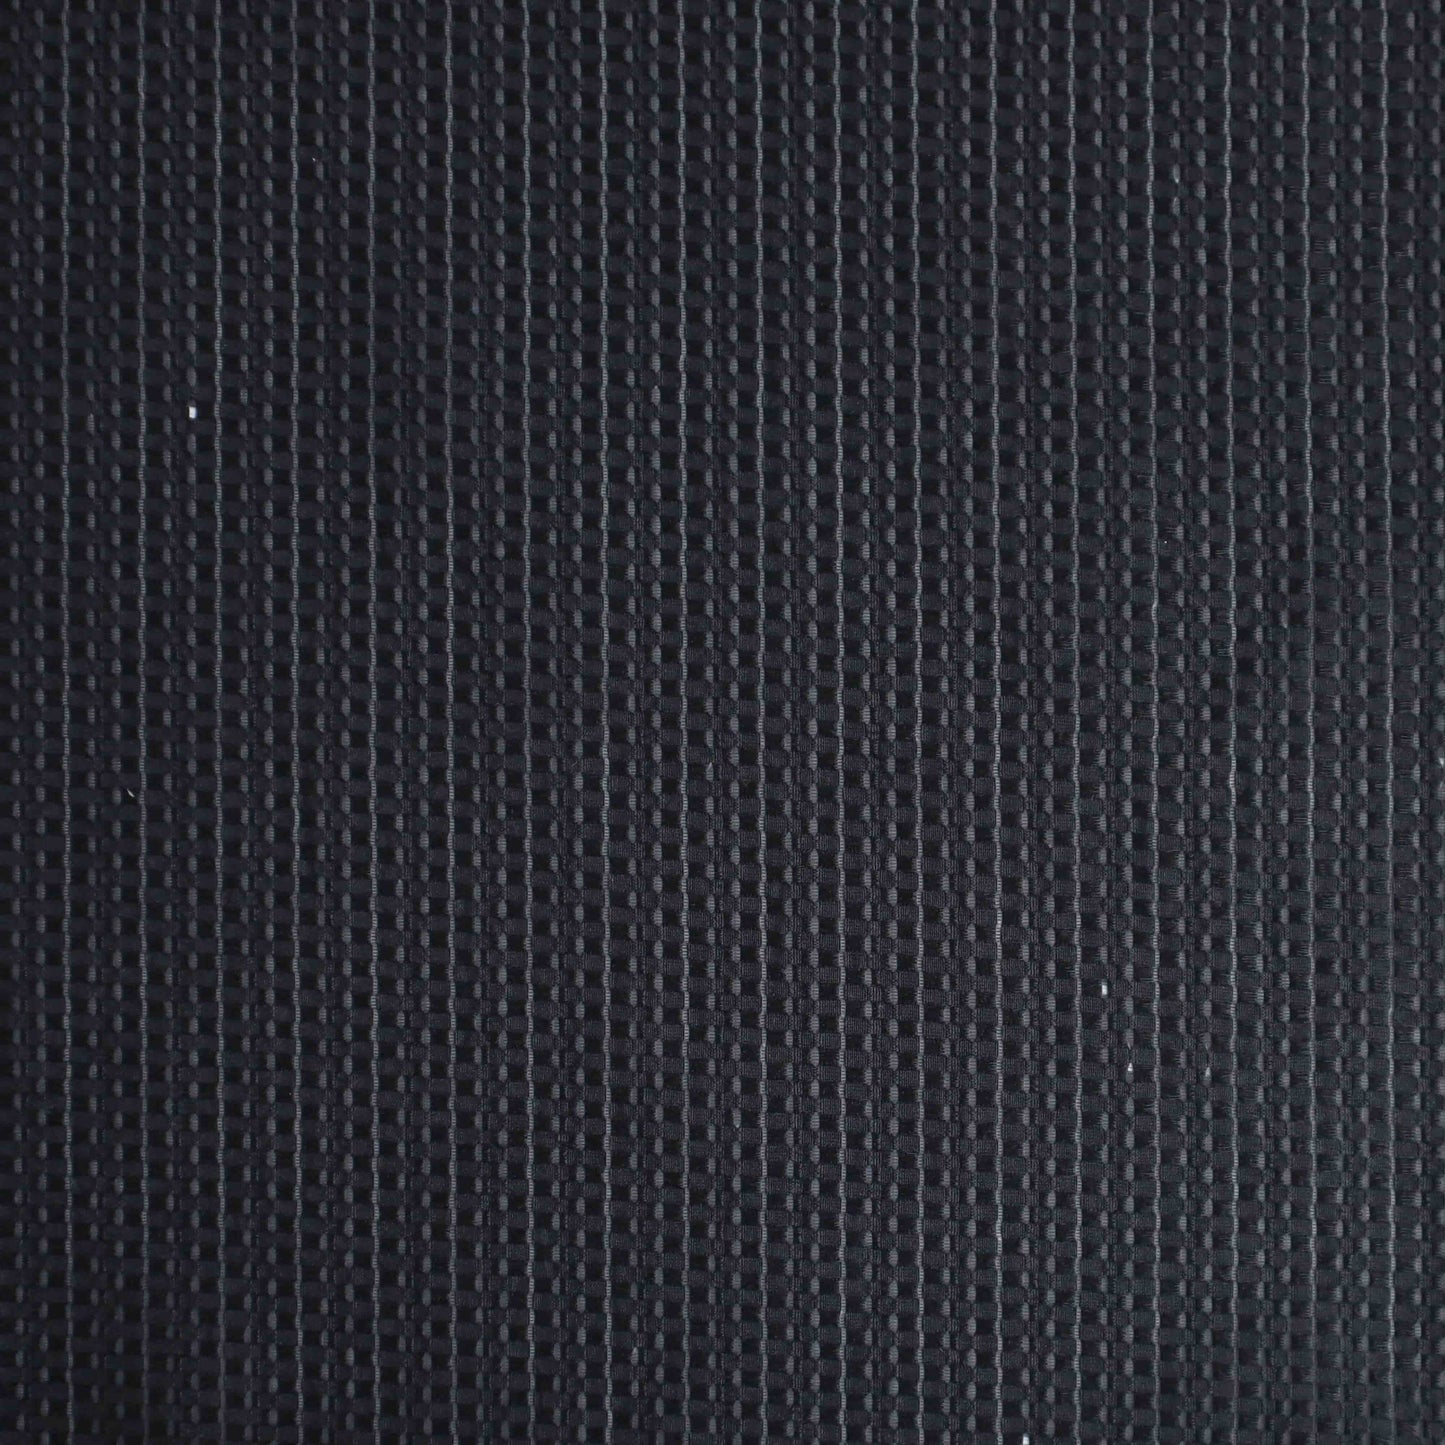 An European-made lightweight polyester silk in Black Caviar. Composing of neatly arranged black small squares, this almost opaque fabric is extremely comfortable and breathable. This fabric has a dry, smooth hand feel yet softens considerably after washing.